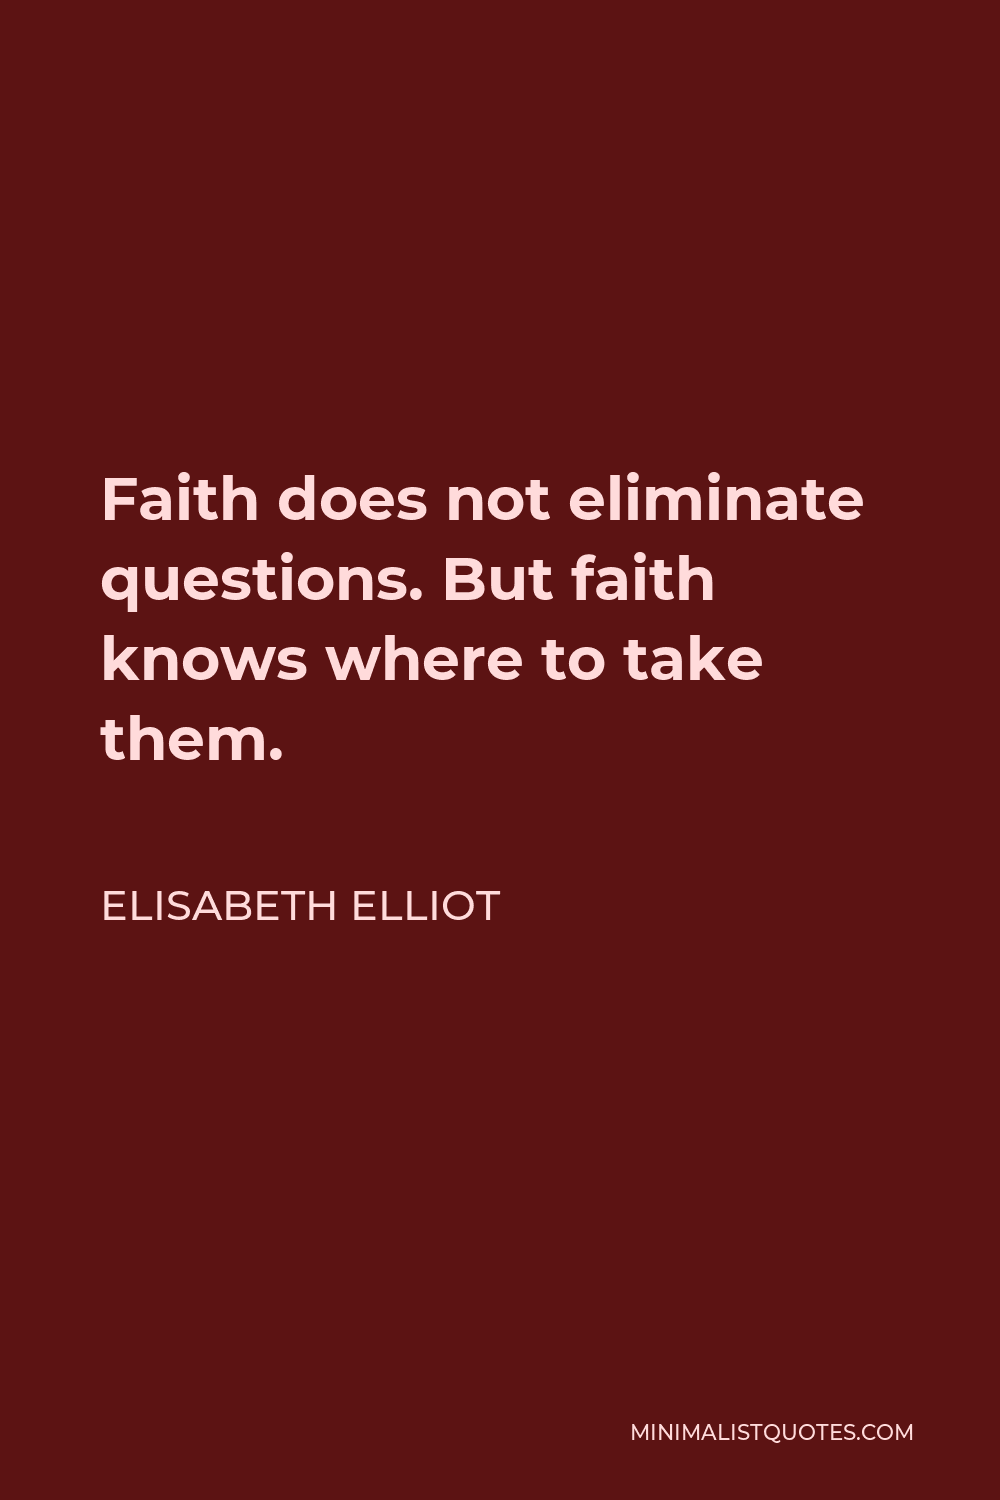 Elisabeth Elliot Quote - Faith does not eliminate questions. But faith knows where to take them.